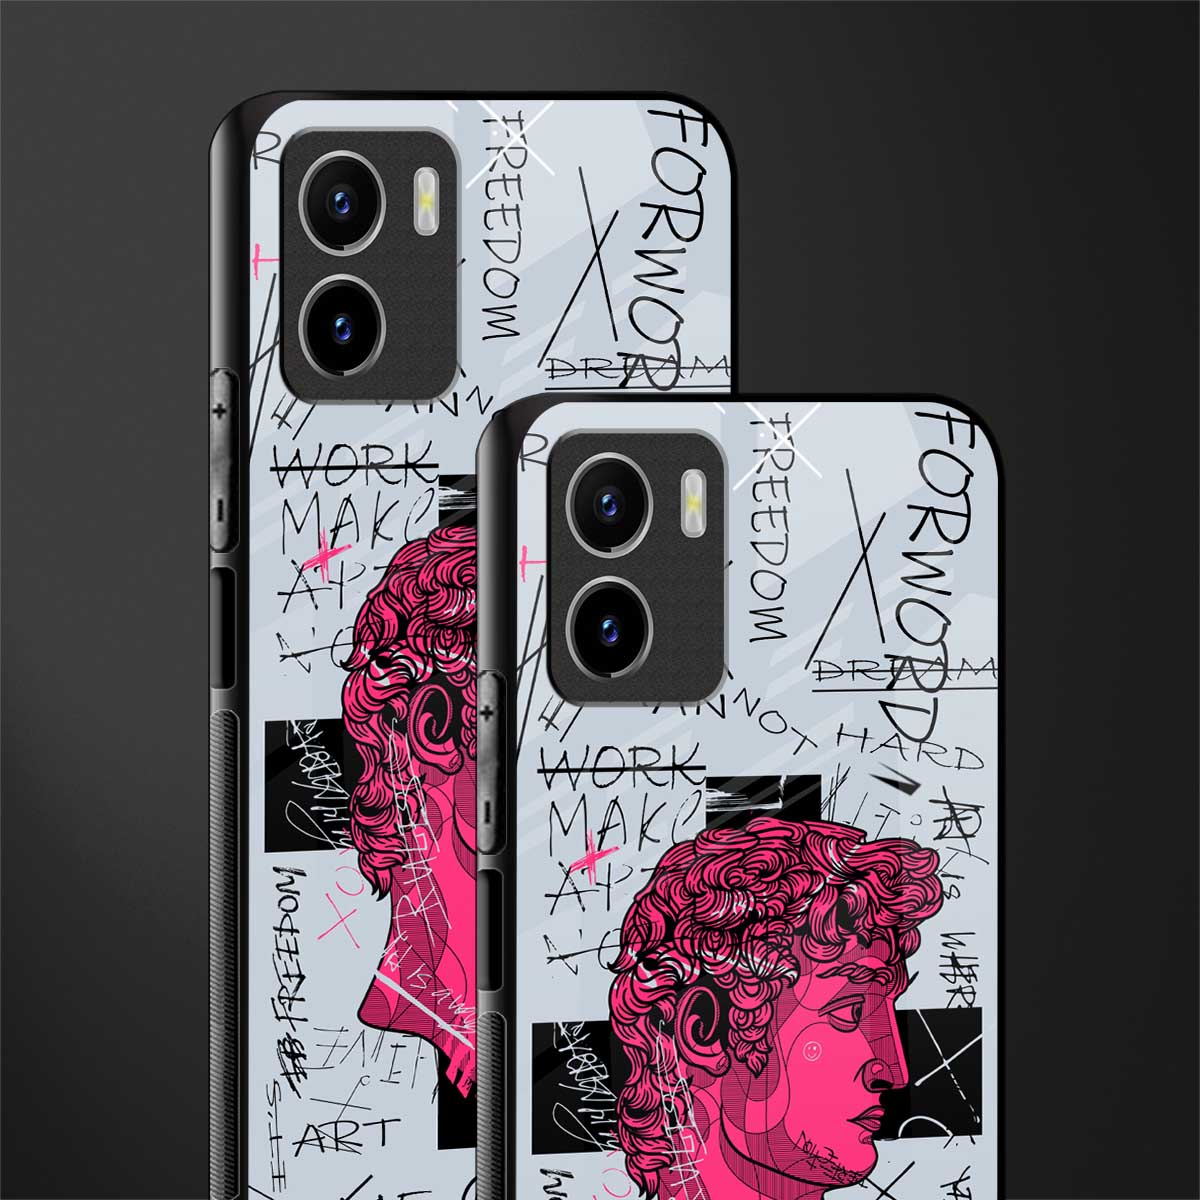 lost in reality david back phone cover | glass case for vivo y15c